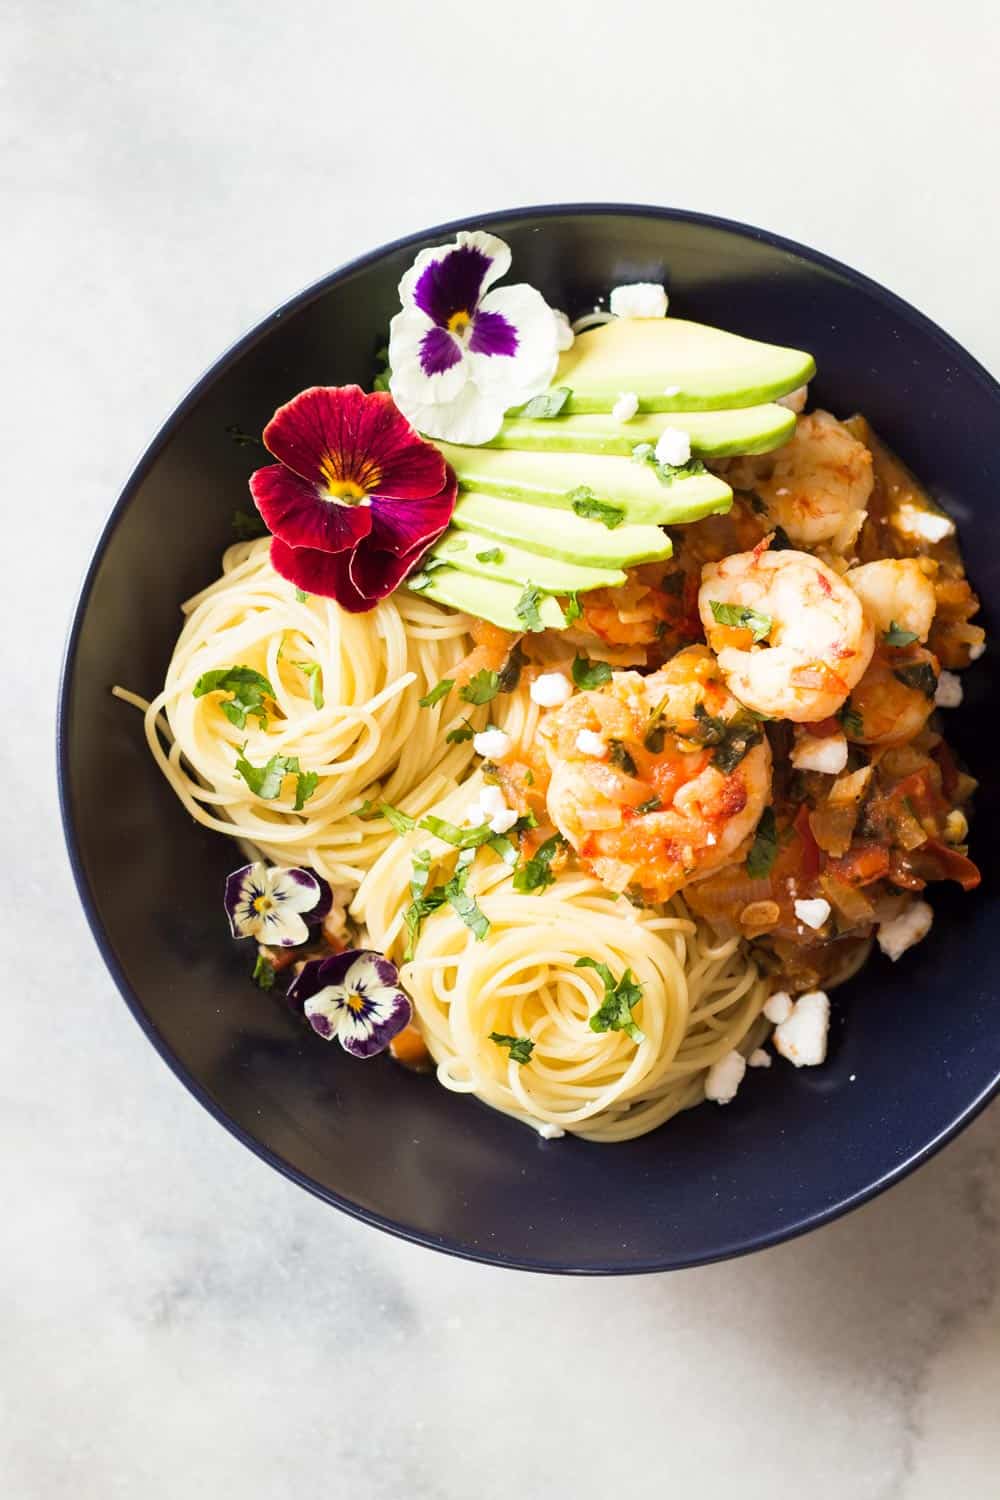 Top view of Mexican-Style Shrimp Capellini Pasta in a black bowl decorated with fresh flowers.